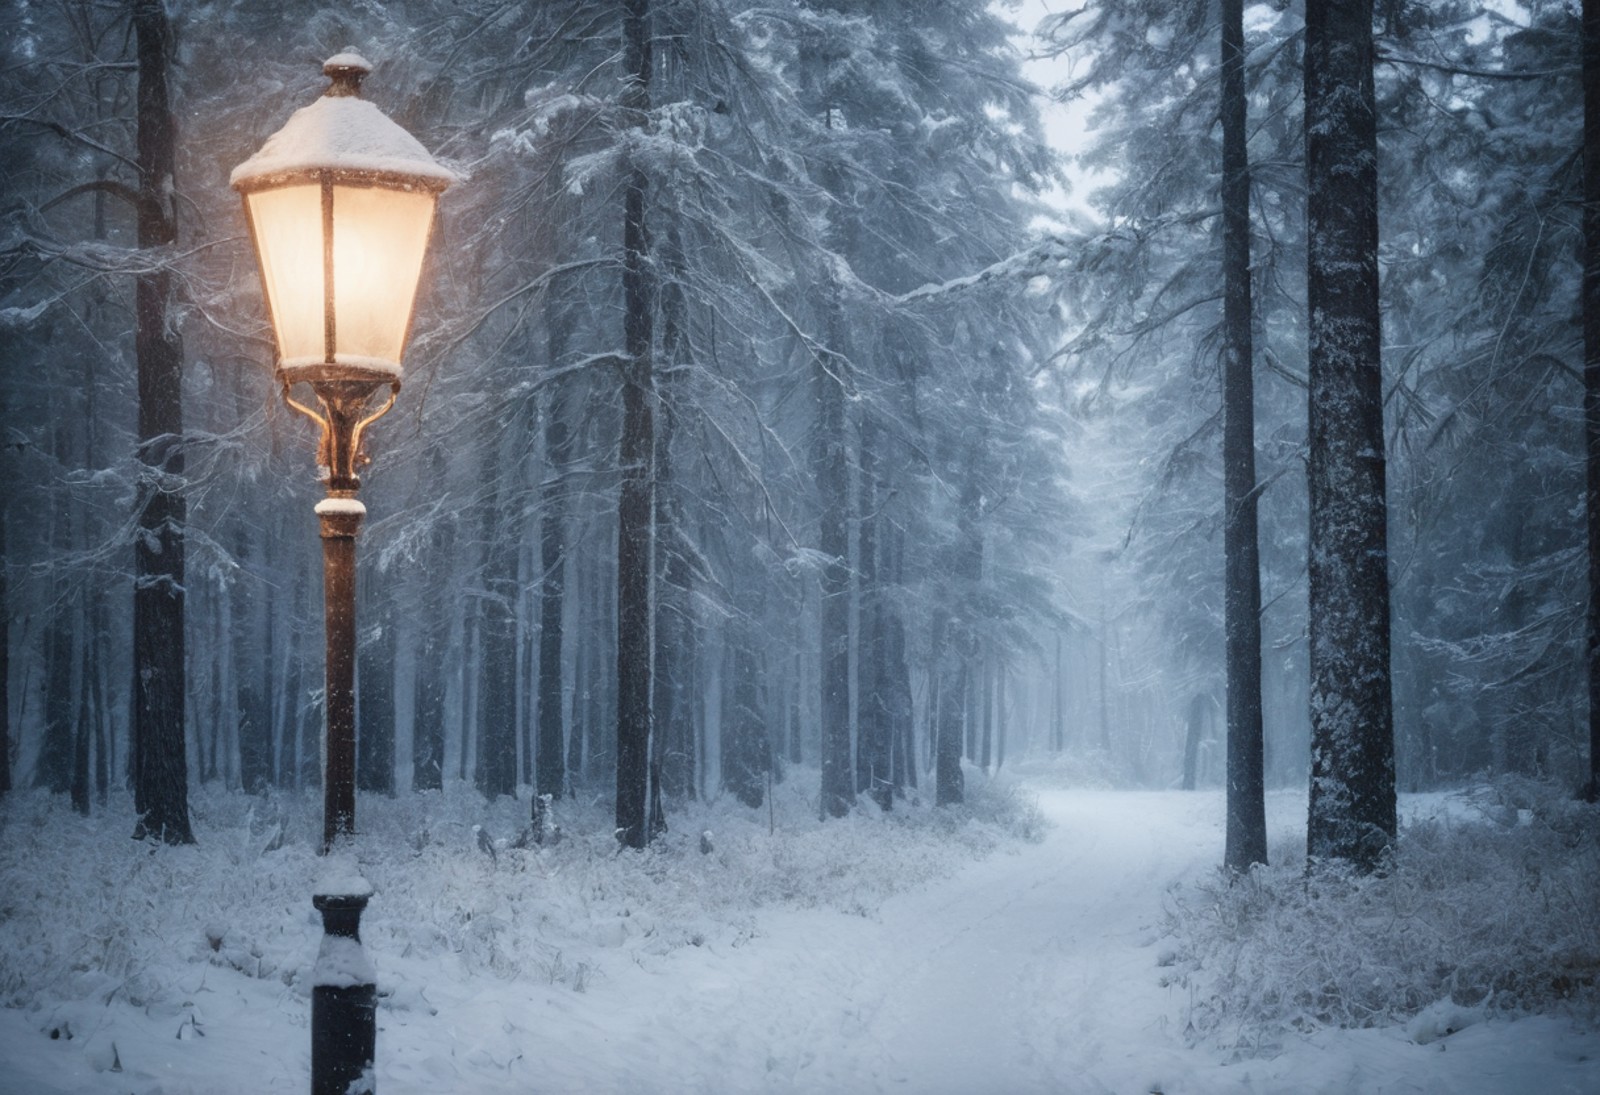 A magical photograph of a snowy forest scene inspired by C.S. Lewis, reminiscent of "The Chronicles of Narnia." Soft snow,...